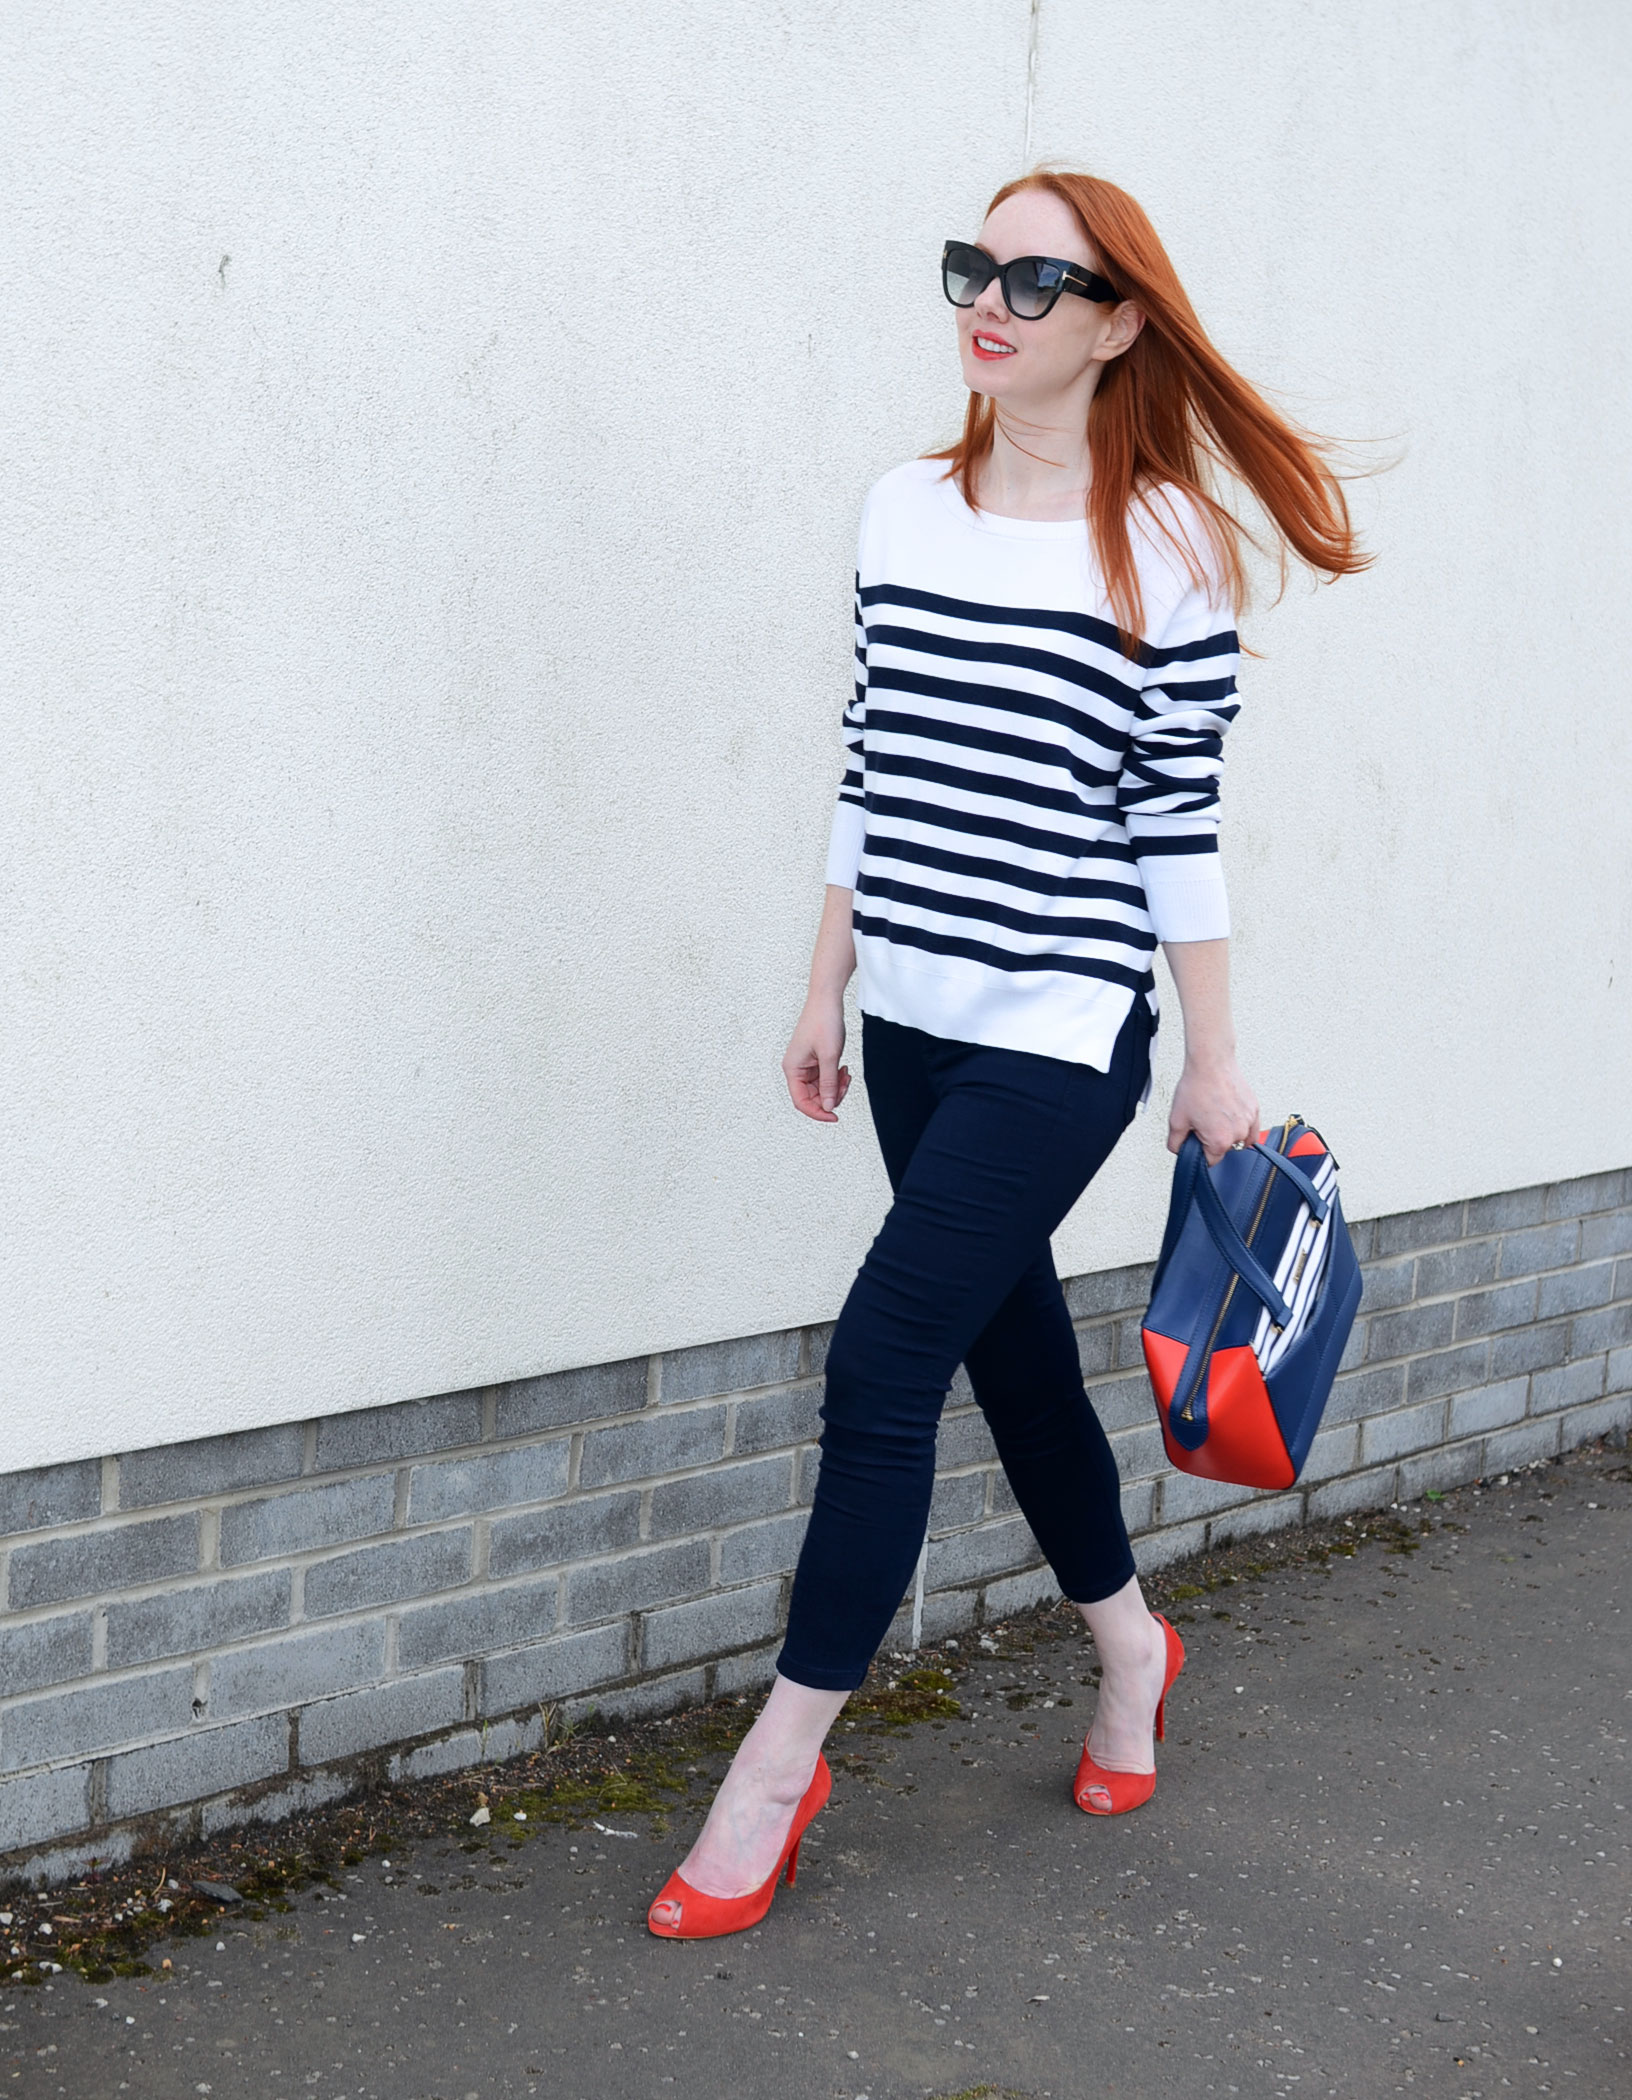 stripe top and red shoes outfit